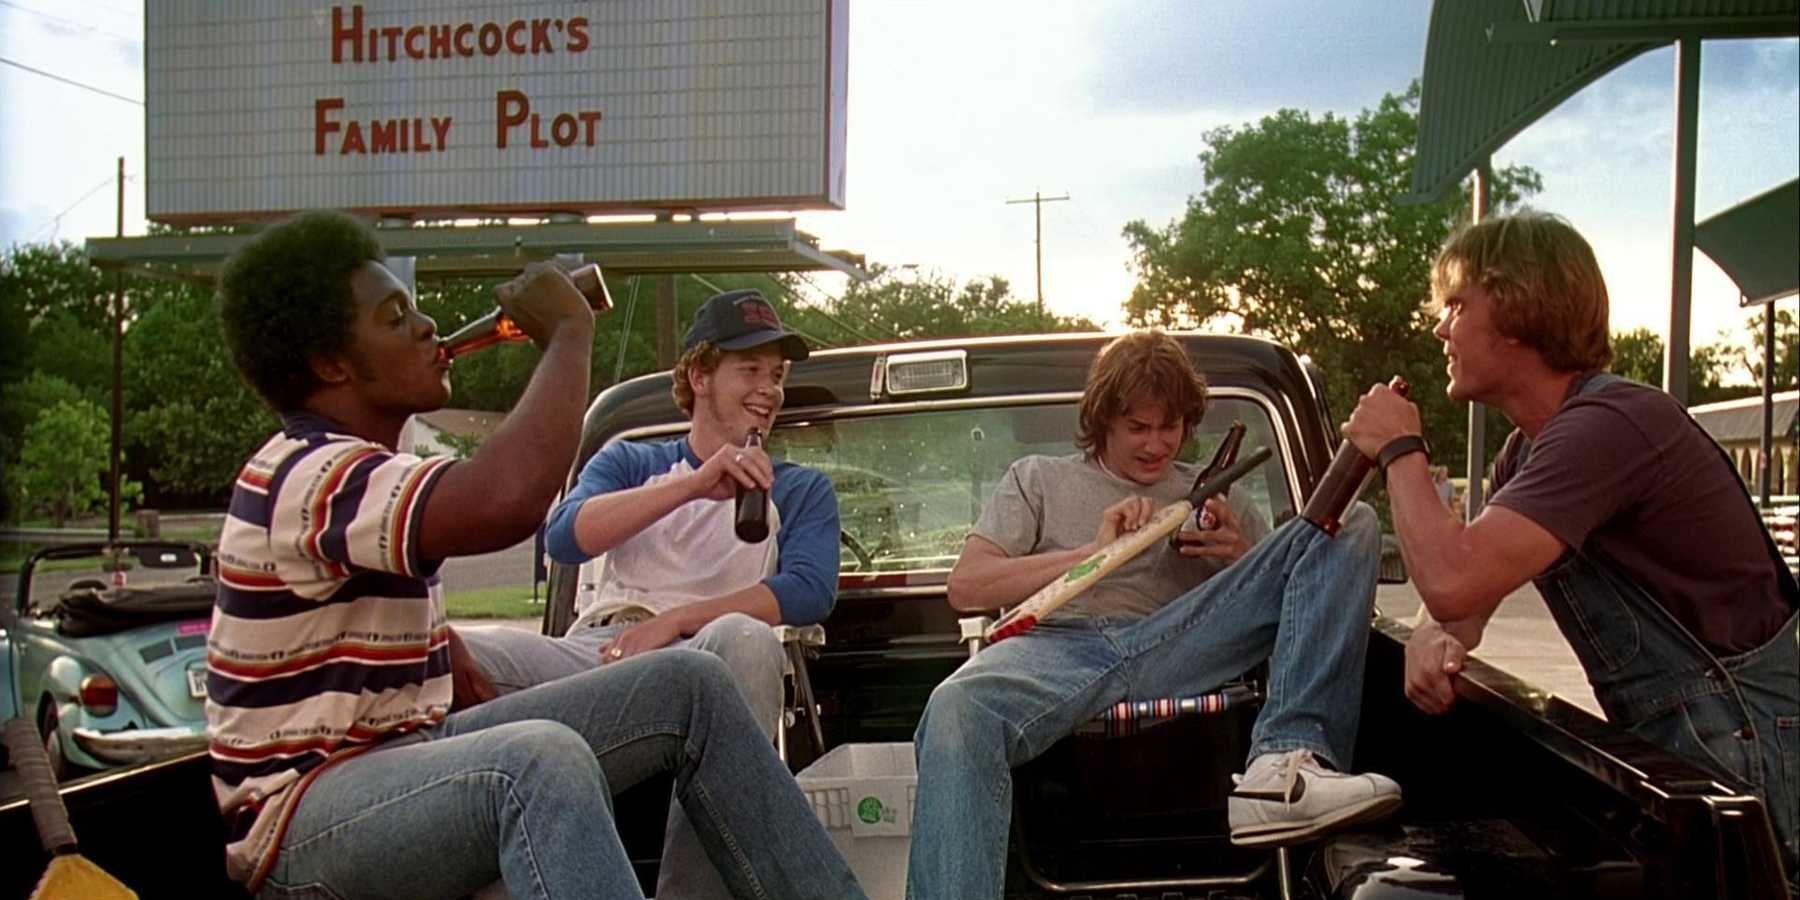 Teenage boys drink beer in a truck in Richard Linklater's Dazed and Confused